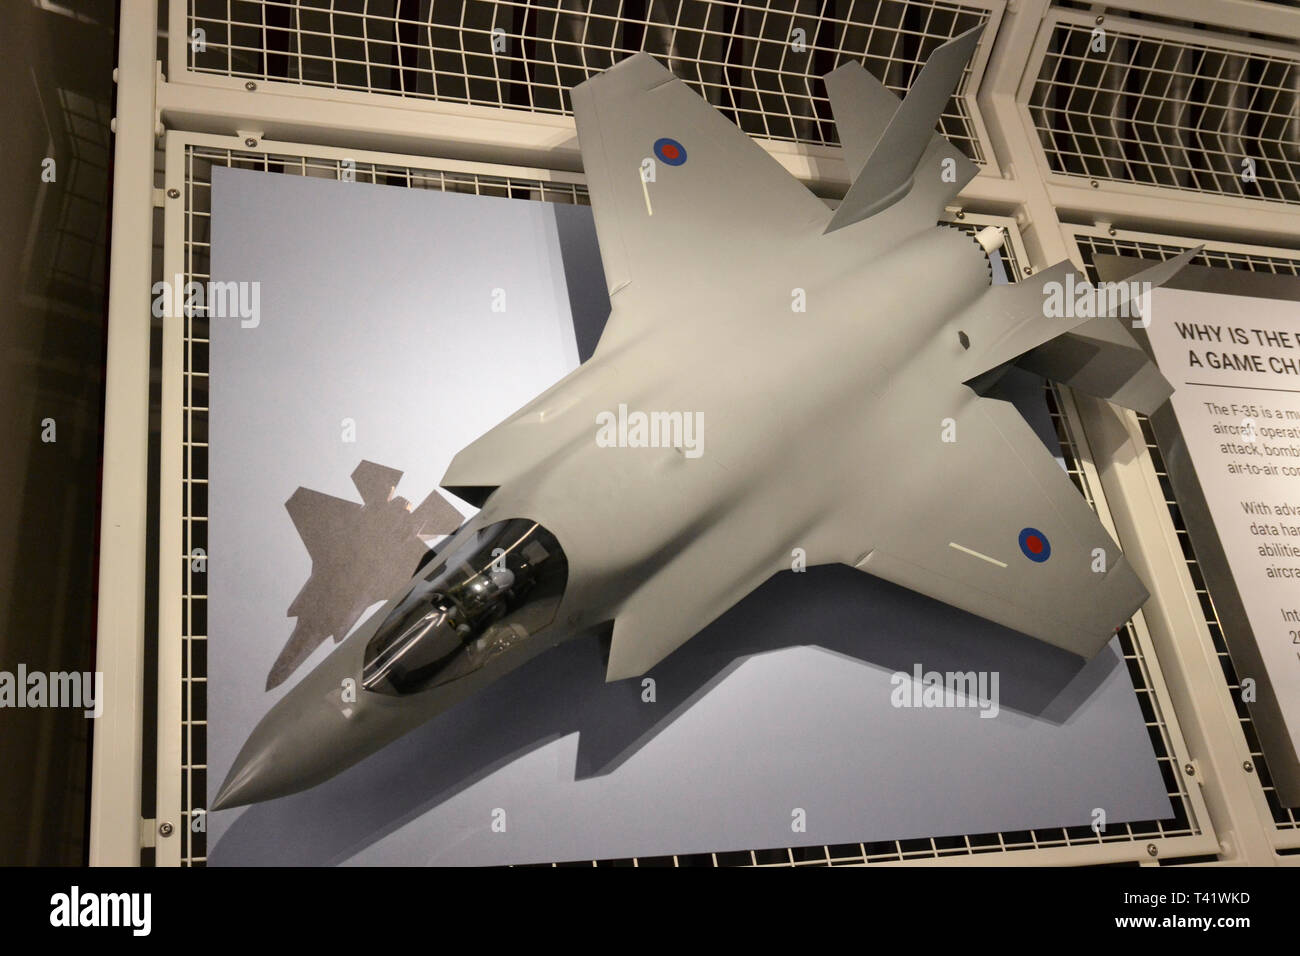 Model of an F-35 Lightning II fighter jet at the RAF Museum, London, UK. Capable of bombing, ground attack, and air-to-air combat. Vertical takeoff. Stock Photo